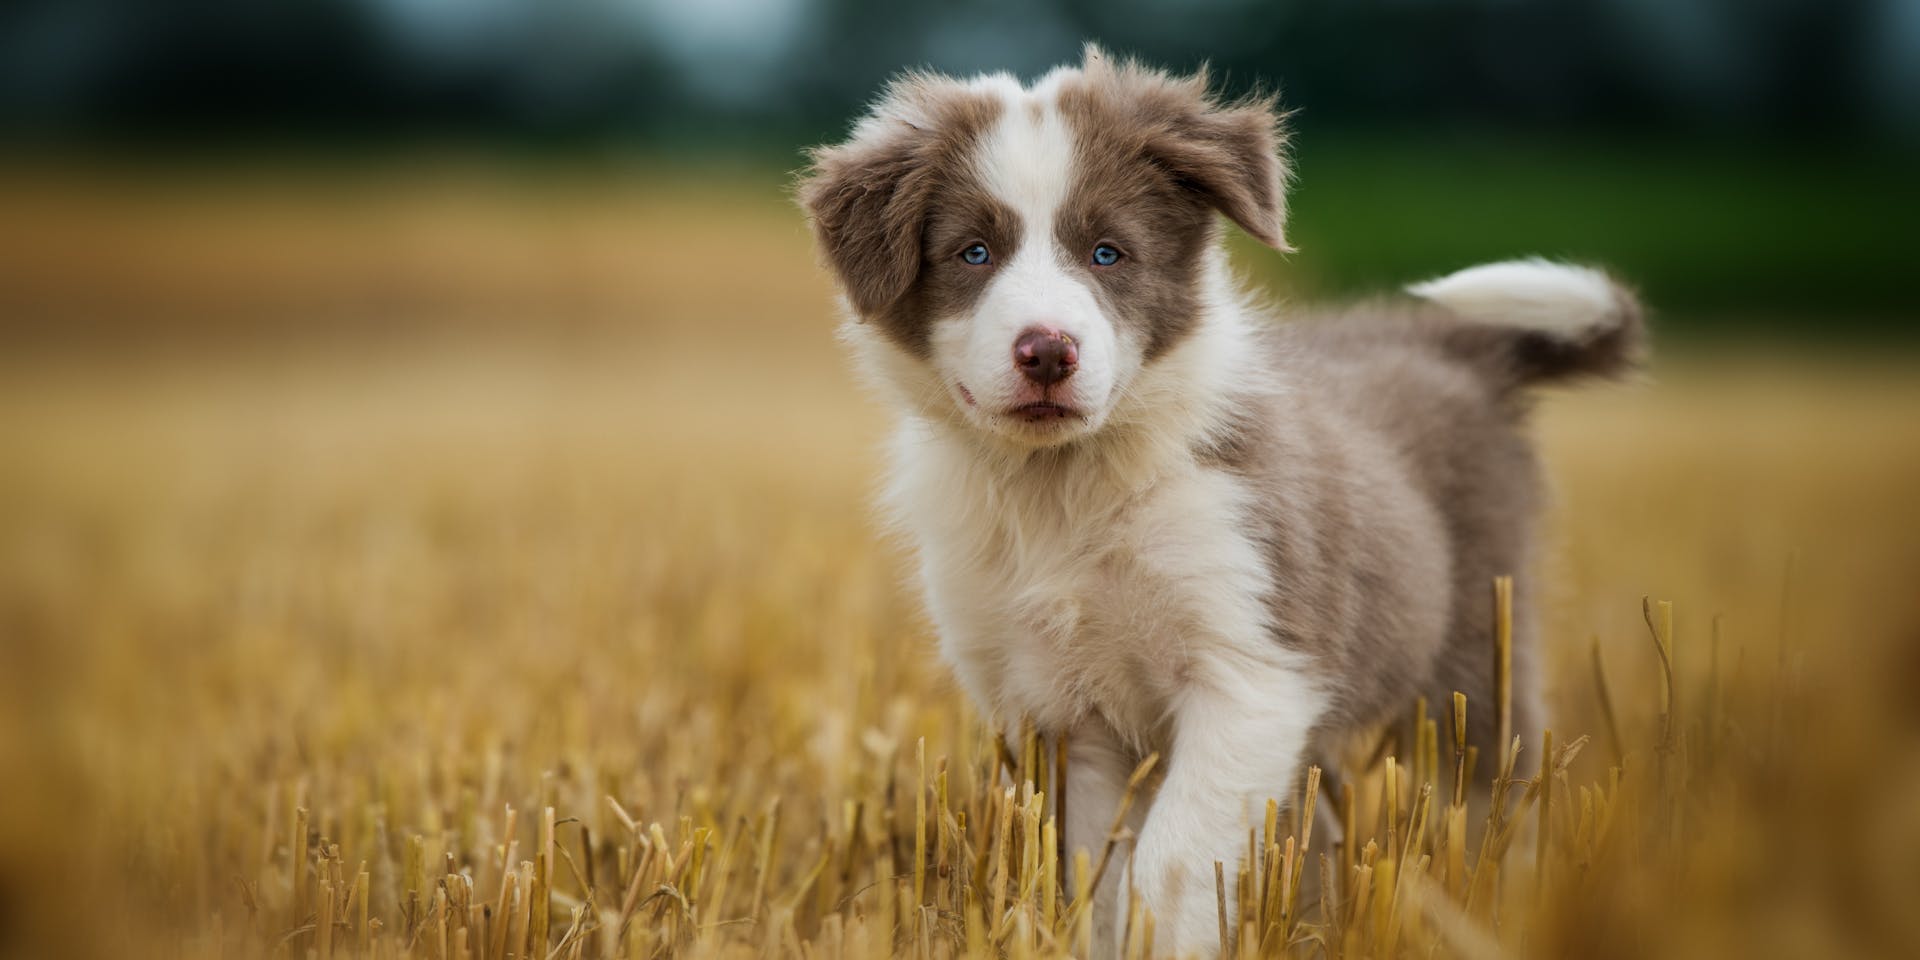 A Border Collie puppy in a field